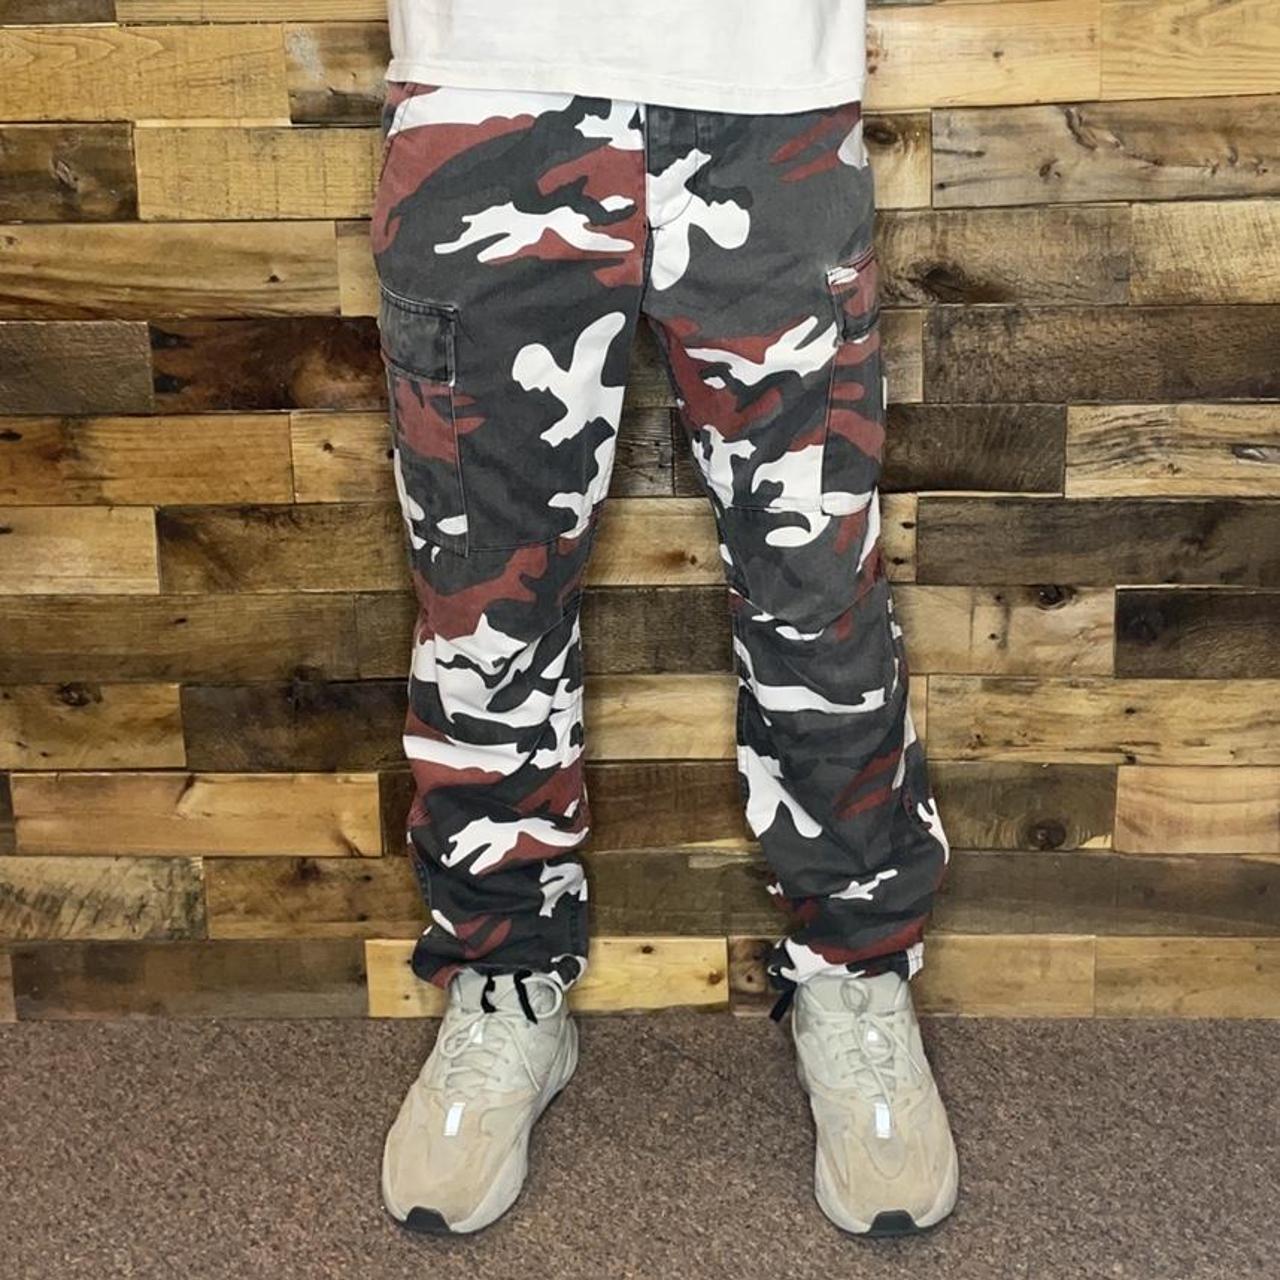 red and black camo pants